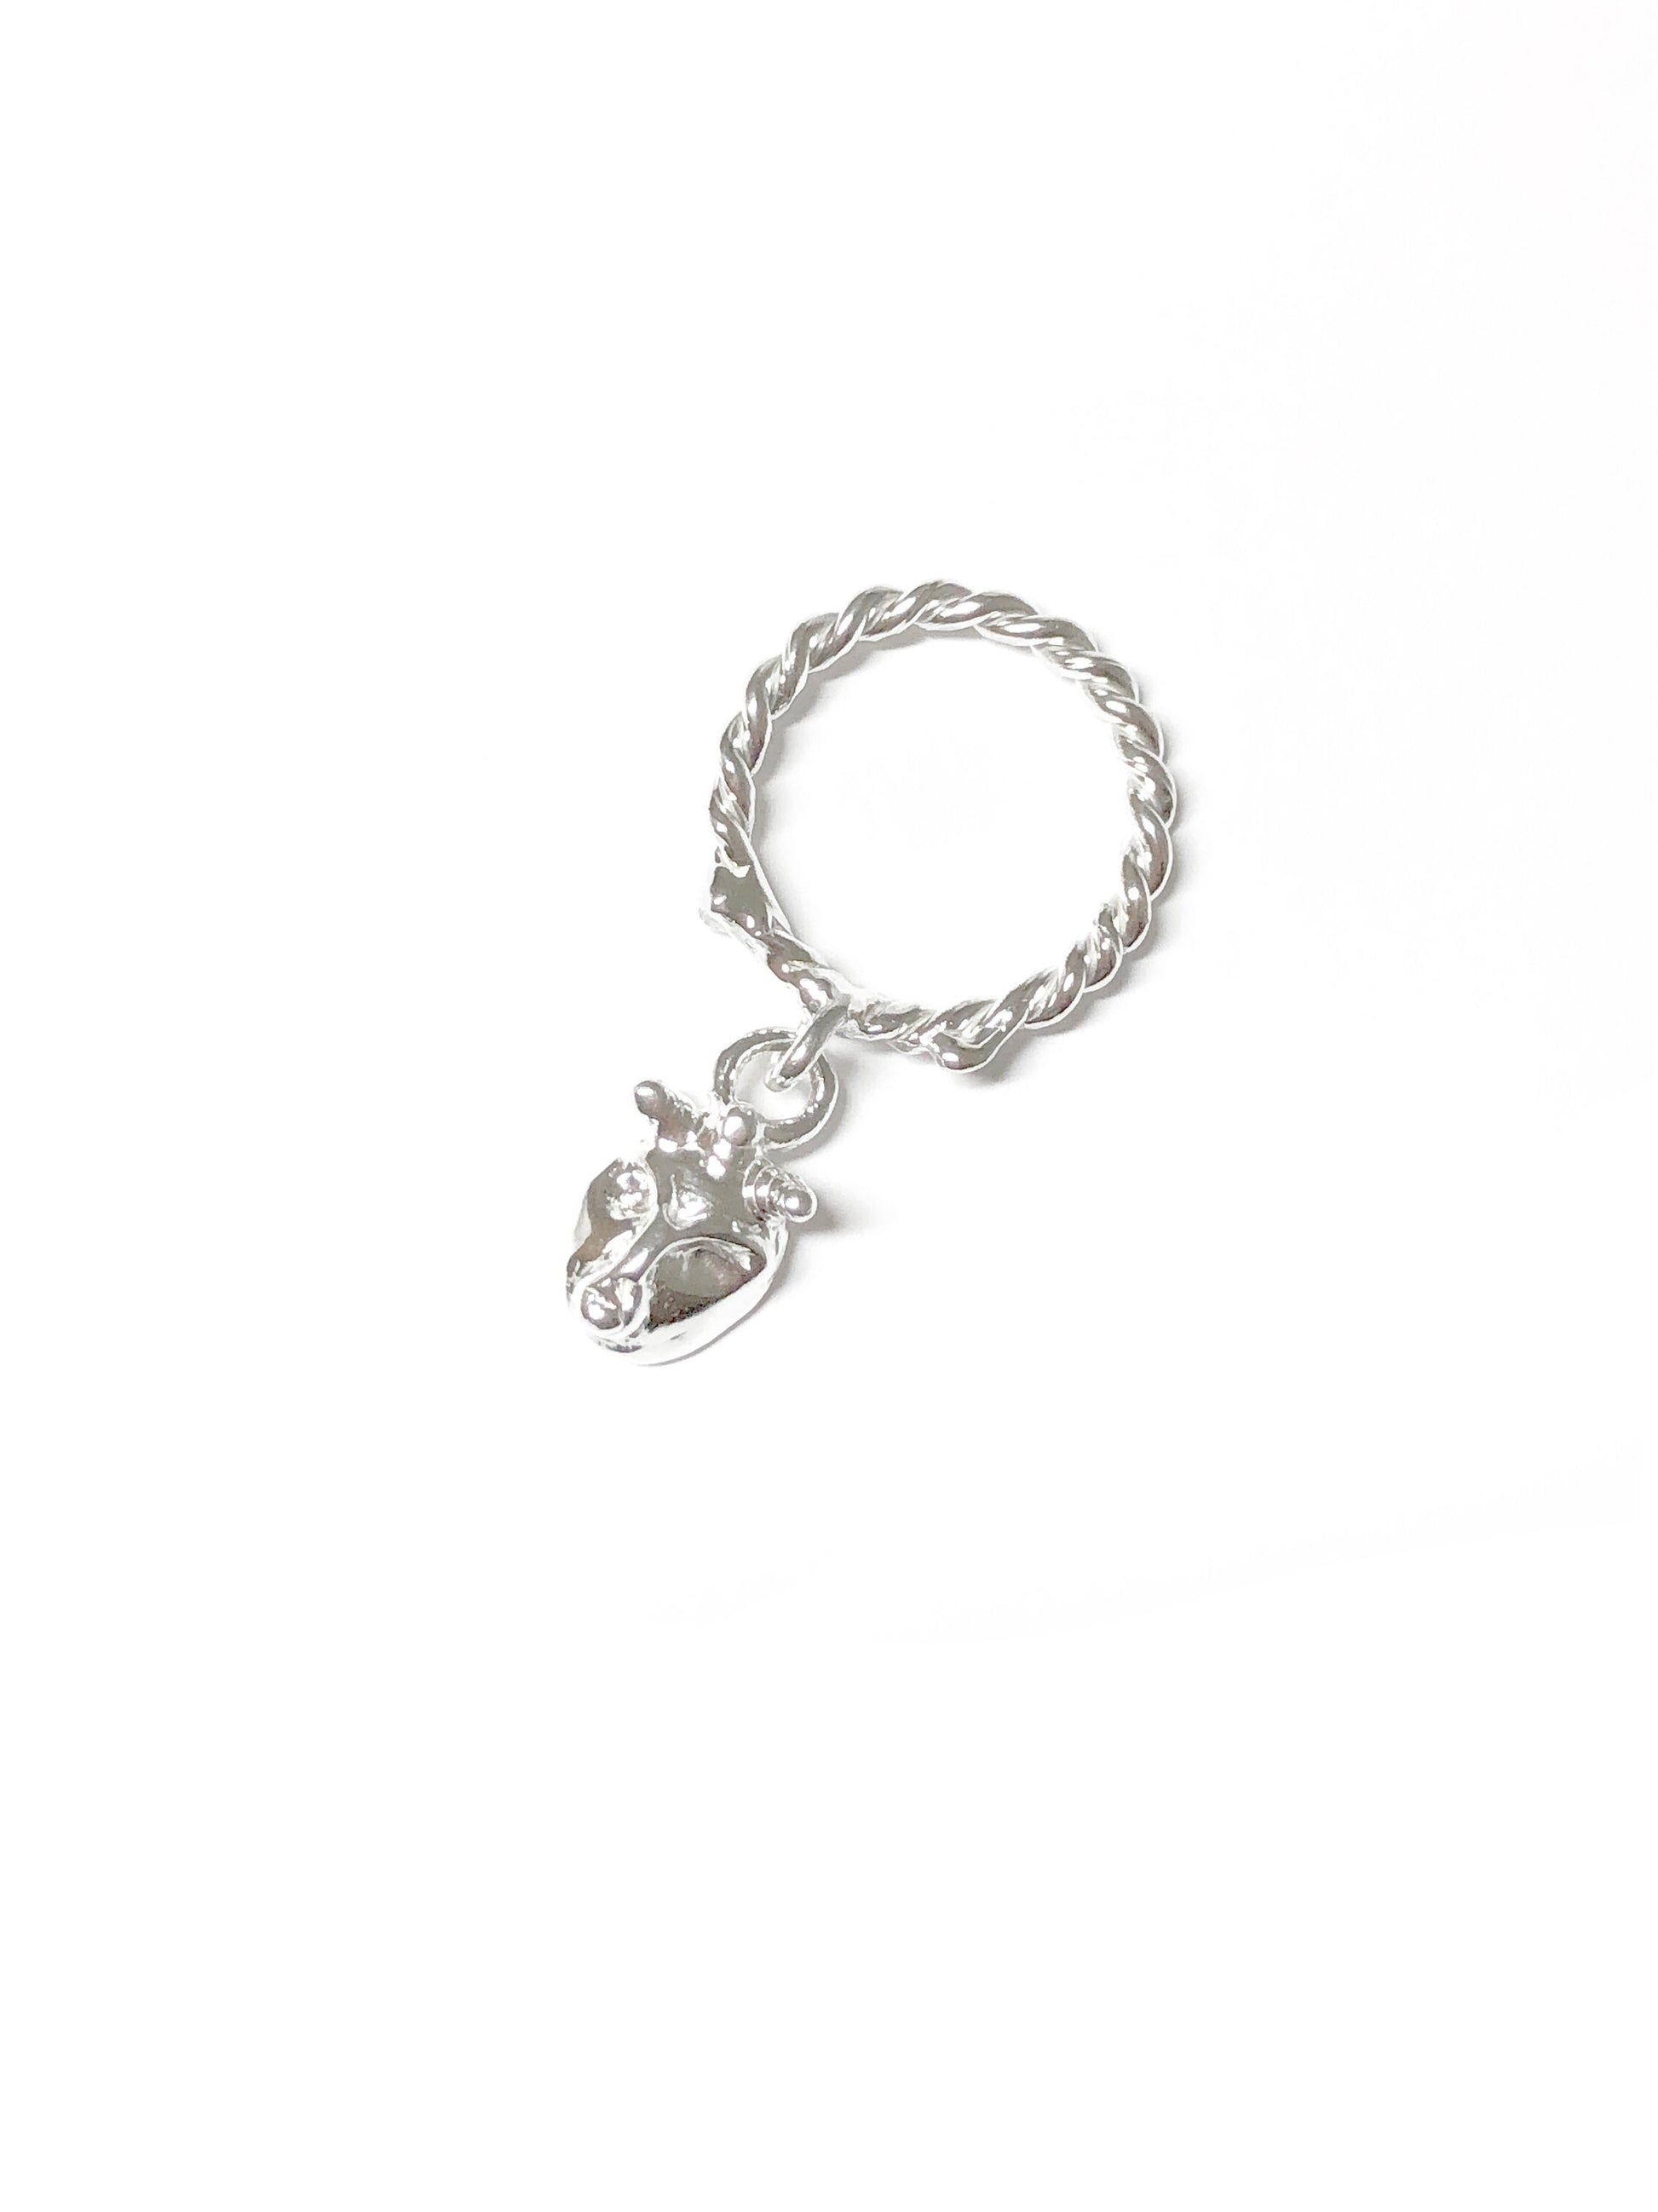  Product photo of Lilith Charm Ring by CLARK. Shoot against white, this unique statement gift is handcraft using the lost wax casting technique in Sterling Silver. 